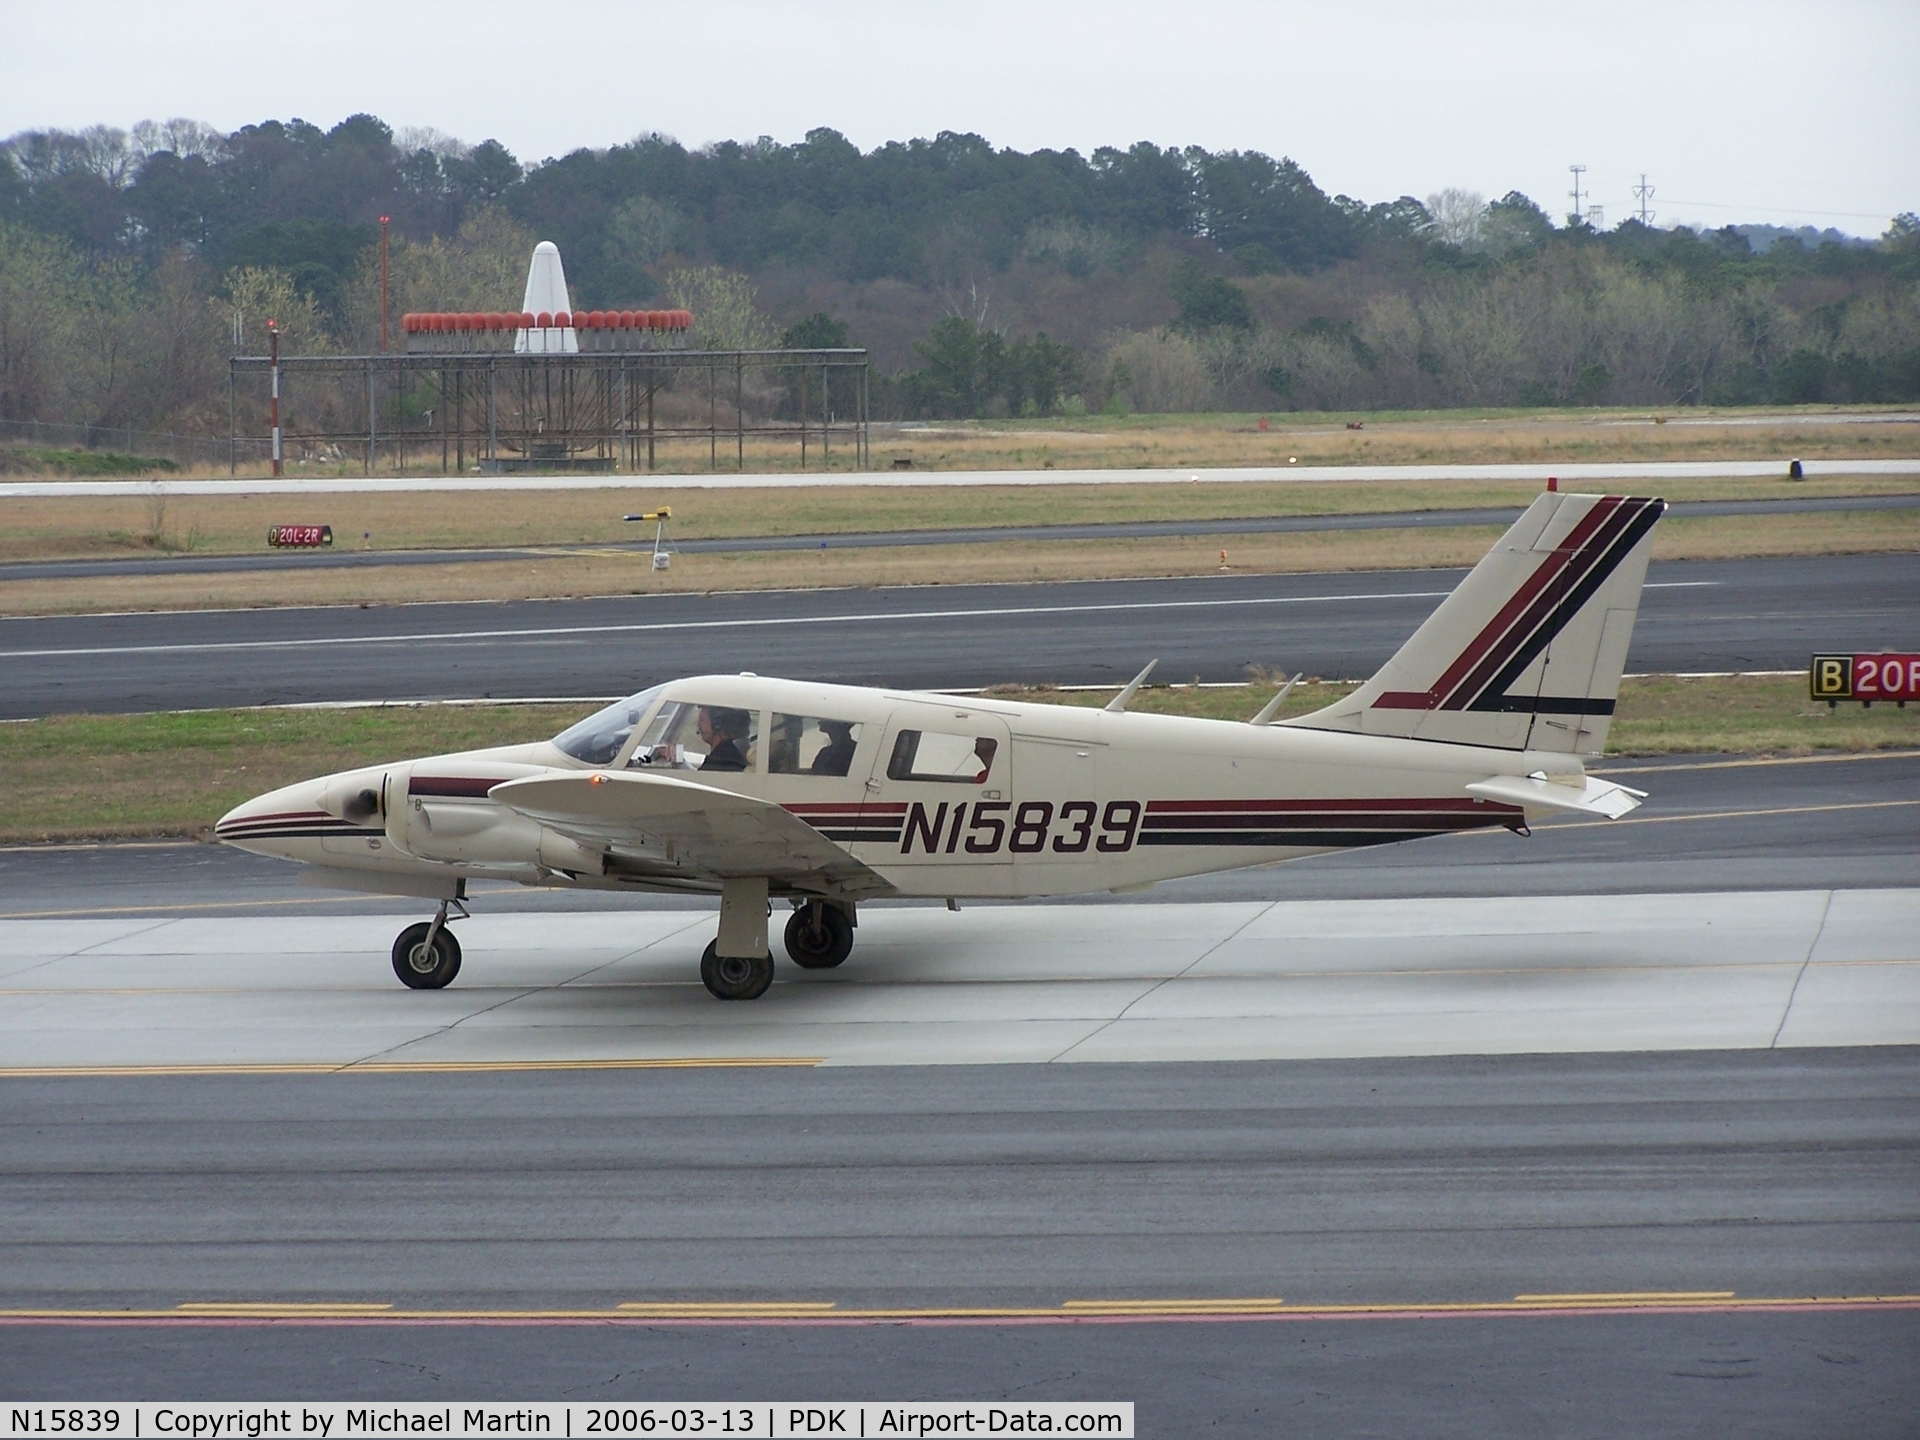 N15839, 1972 Piper PA-34-200 C/N 34-7350100, Taxing back from flight